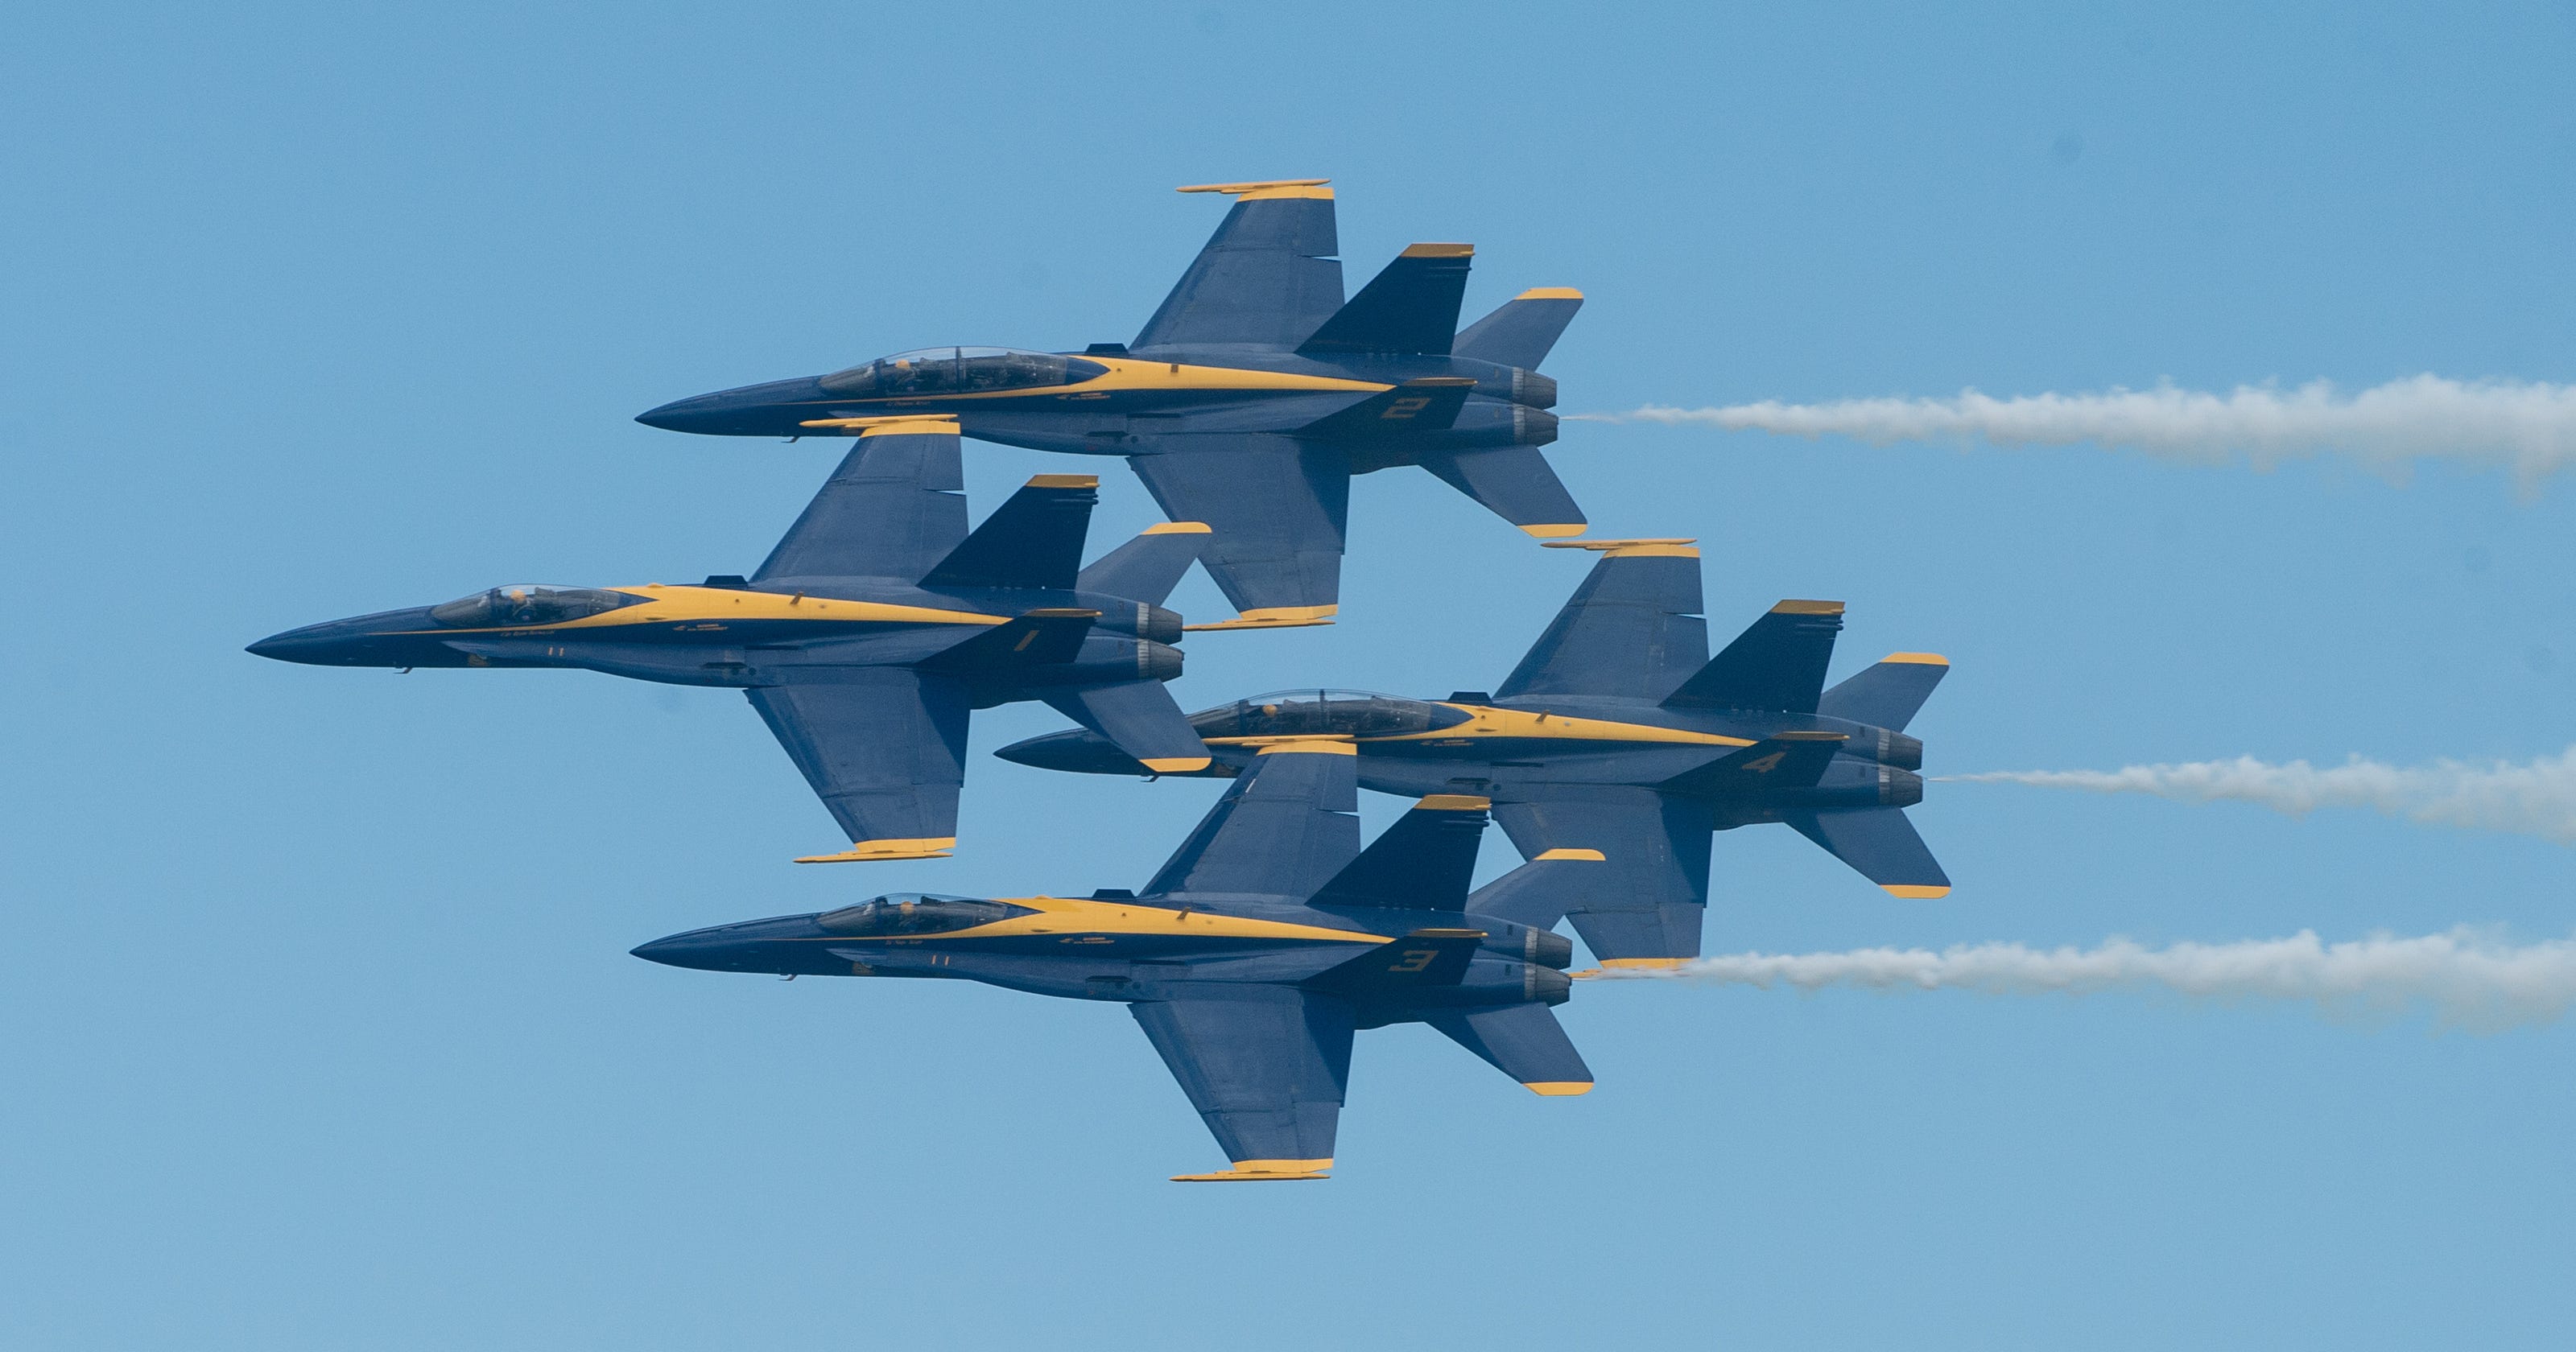 2020 Blue Angels schedule up in the air, but 2019 OC Air Show on track